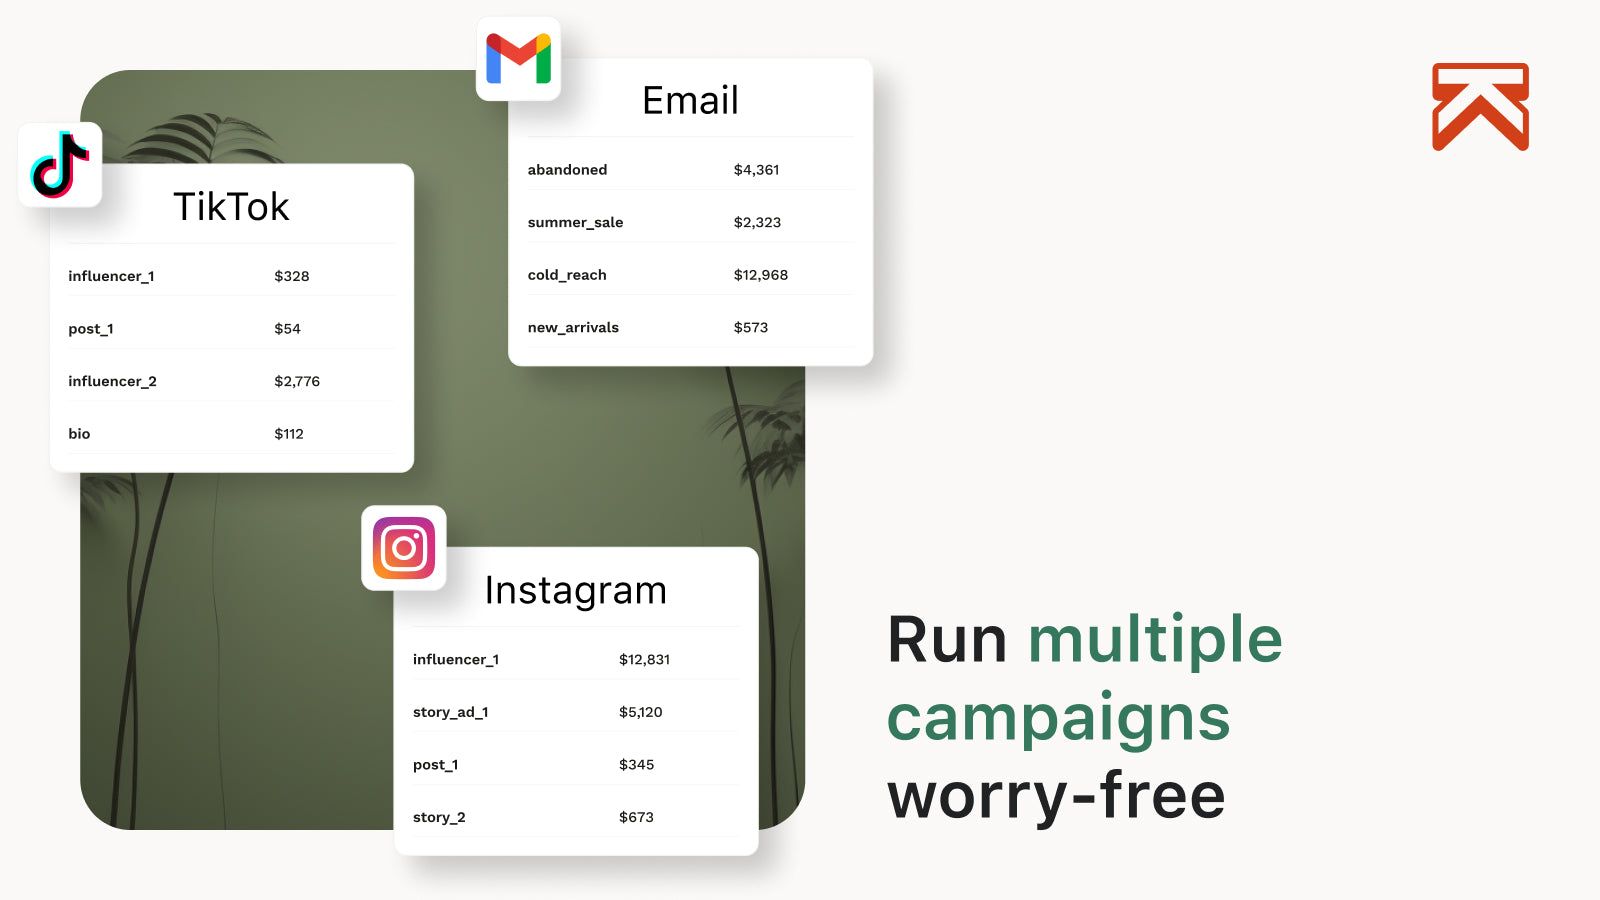 Run multiple campaigns worry-free.